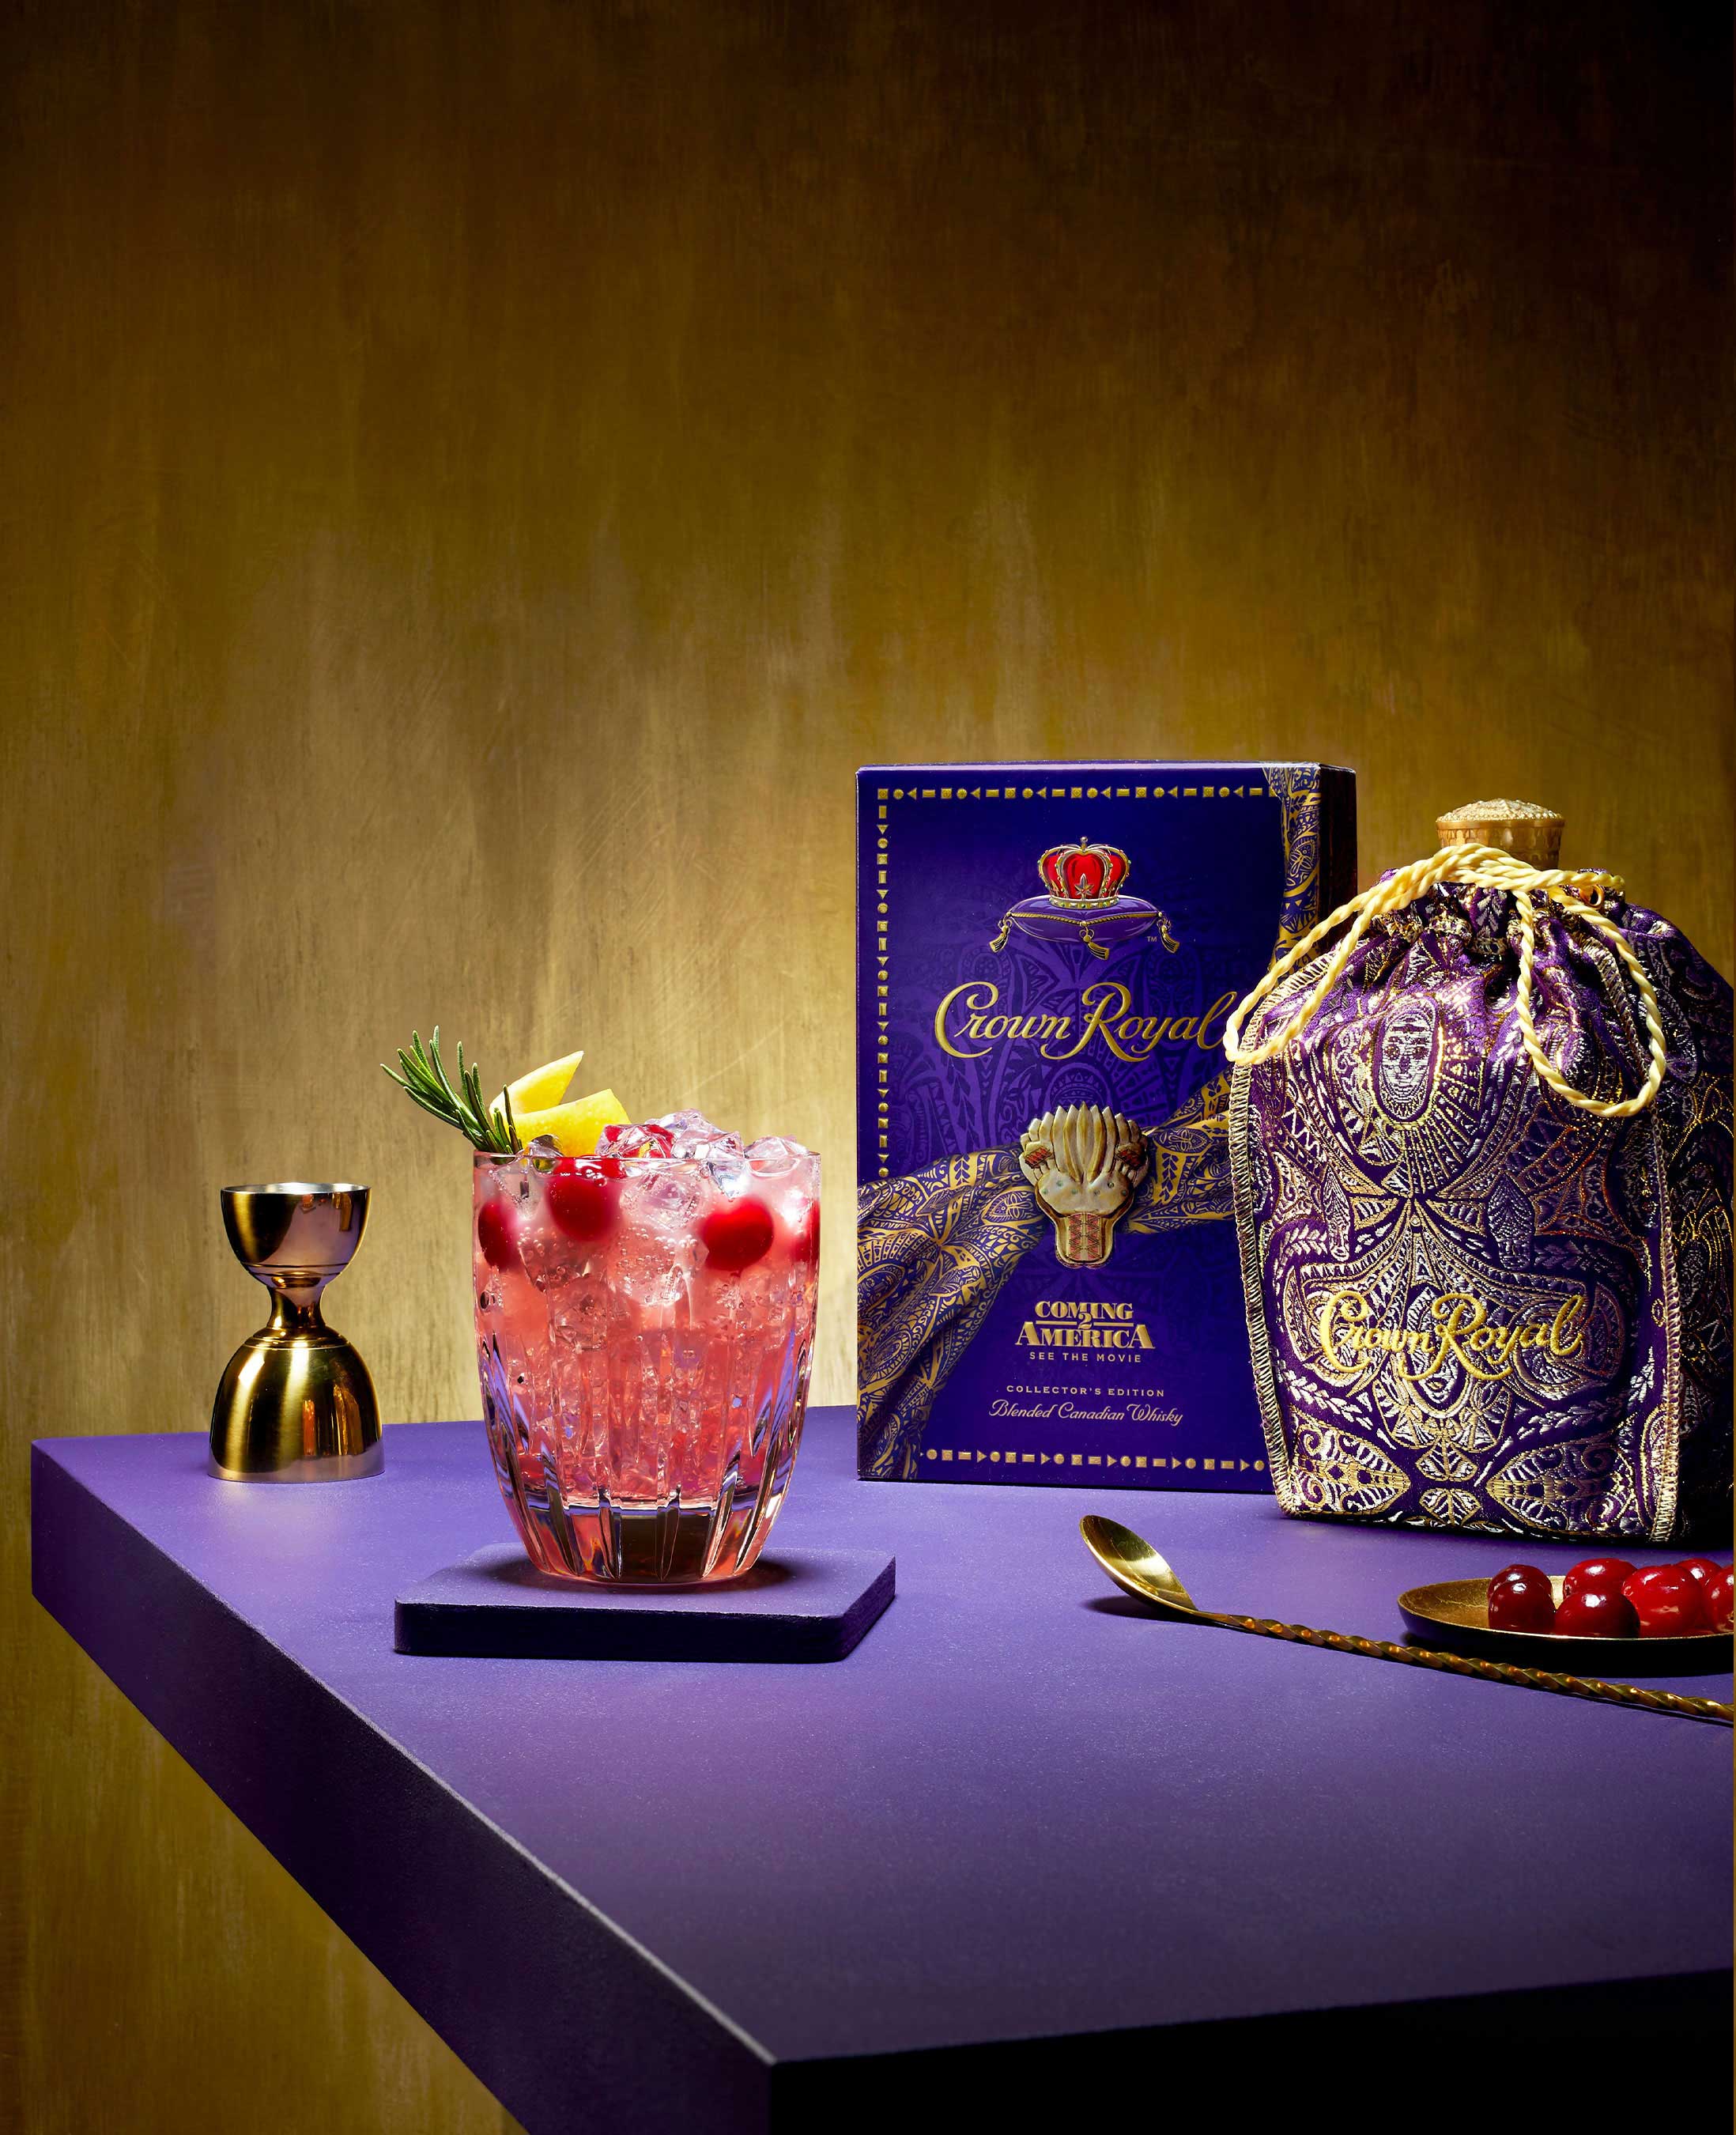 Enjoy the delicious Crown Royal Ruby Rumble cocktail while watching the Coming 2 America movie premiere on March 5th.